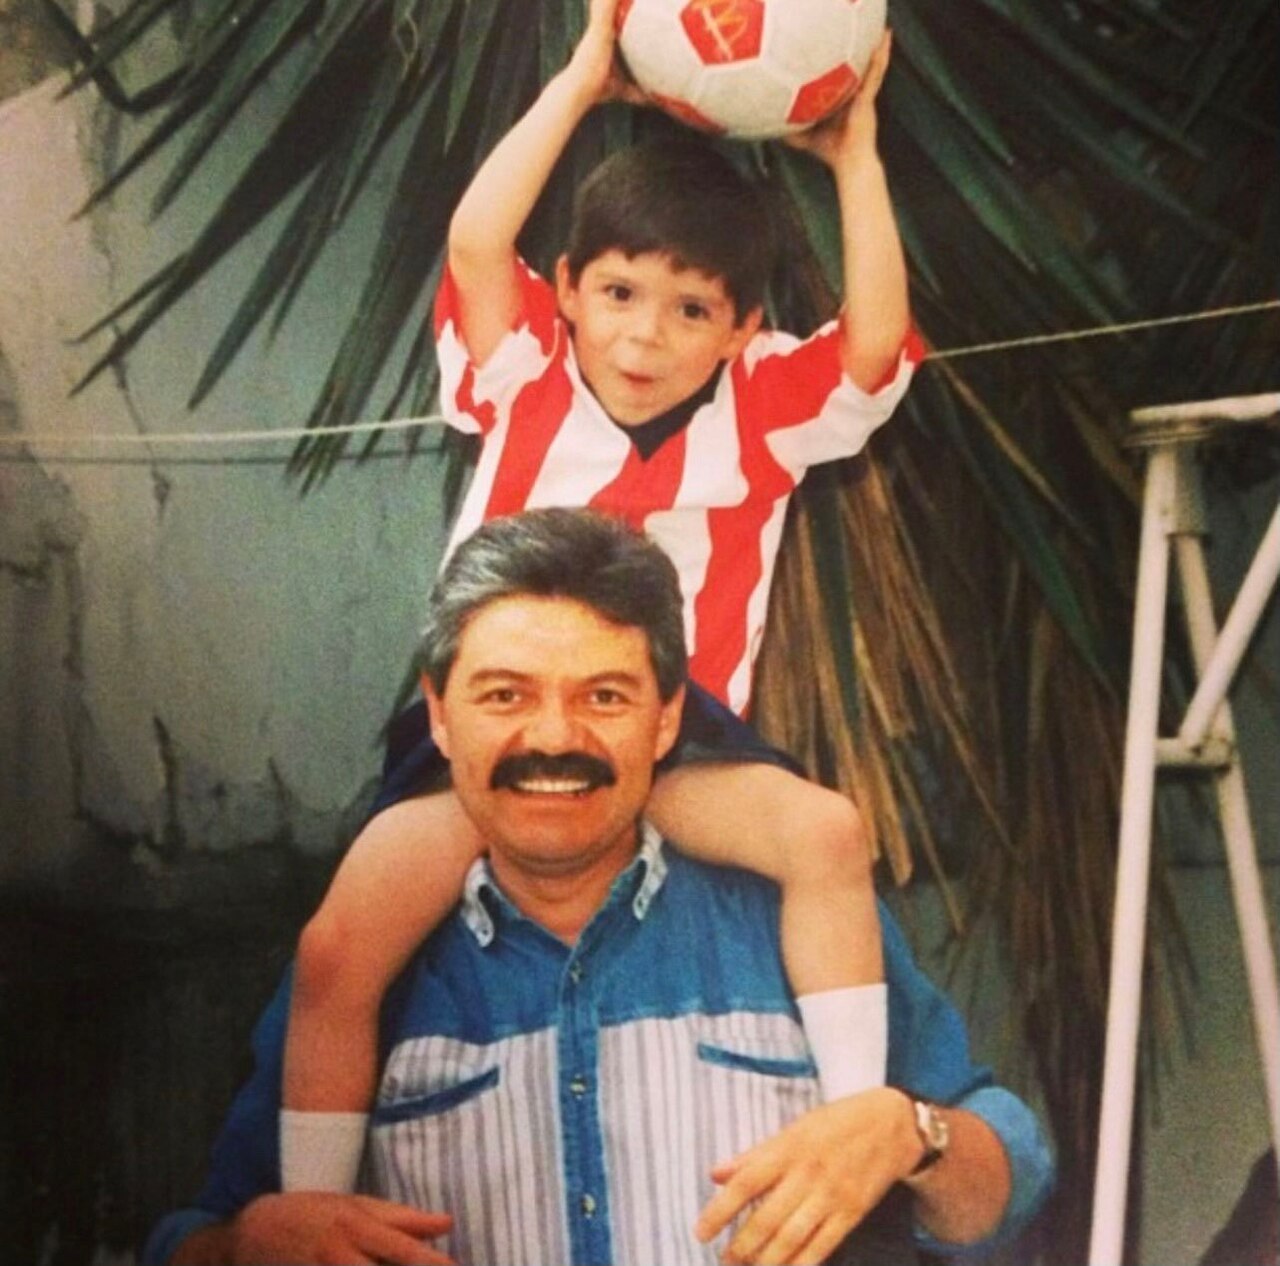 A young boy holding a soccer ball sits on his father's shoulders.